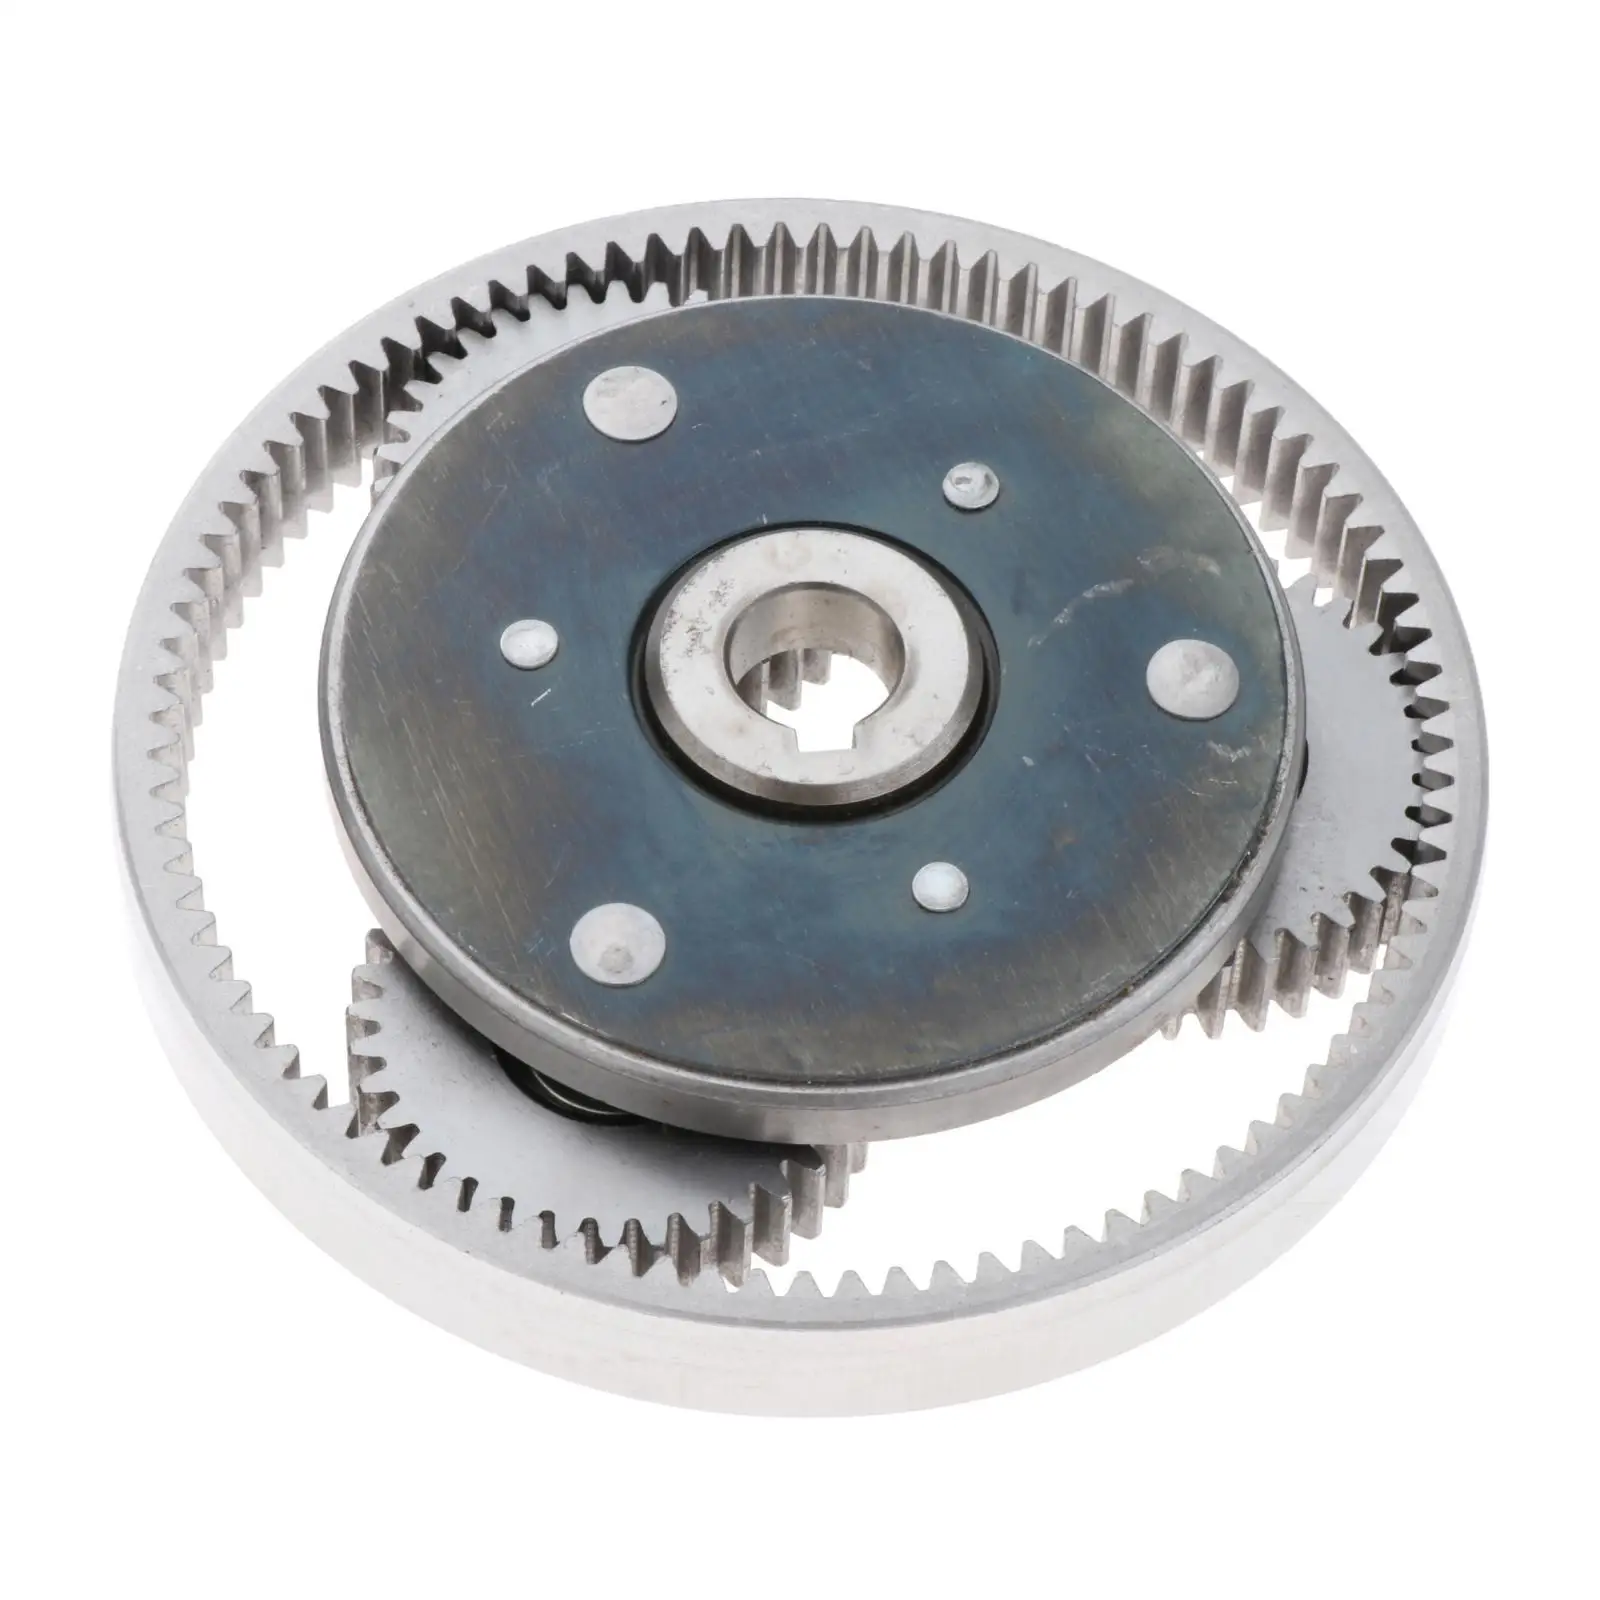 1 Set 36T Diameter:47.5 Mm Thickness:12Mm High  Electric Vehicle Motor  Ring  Clutch